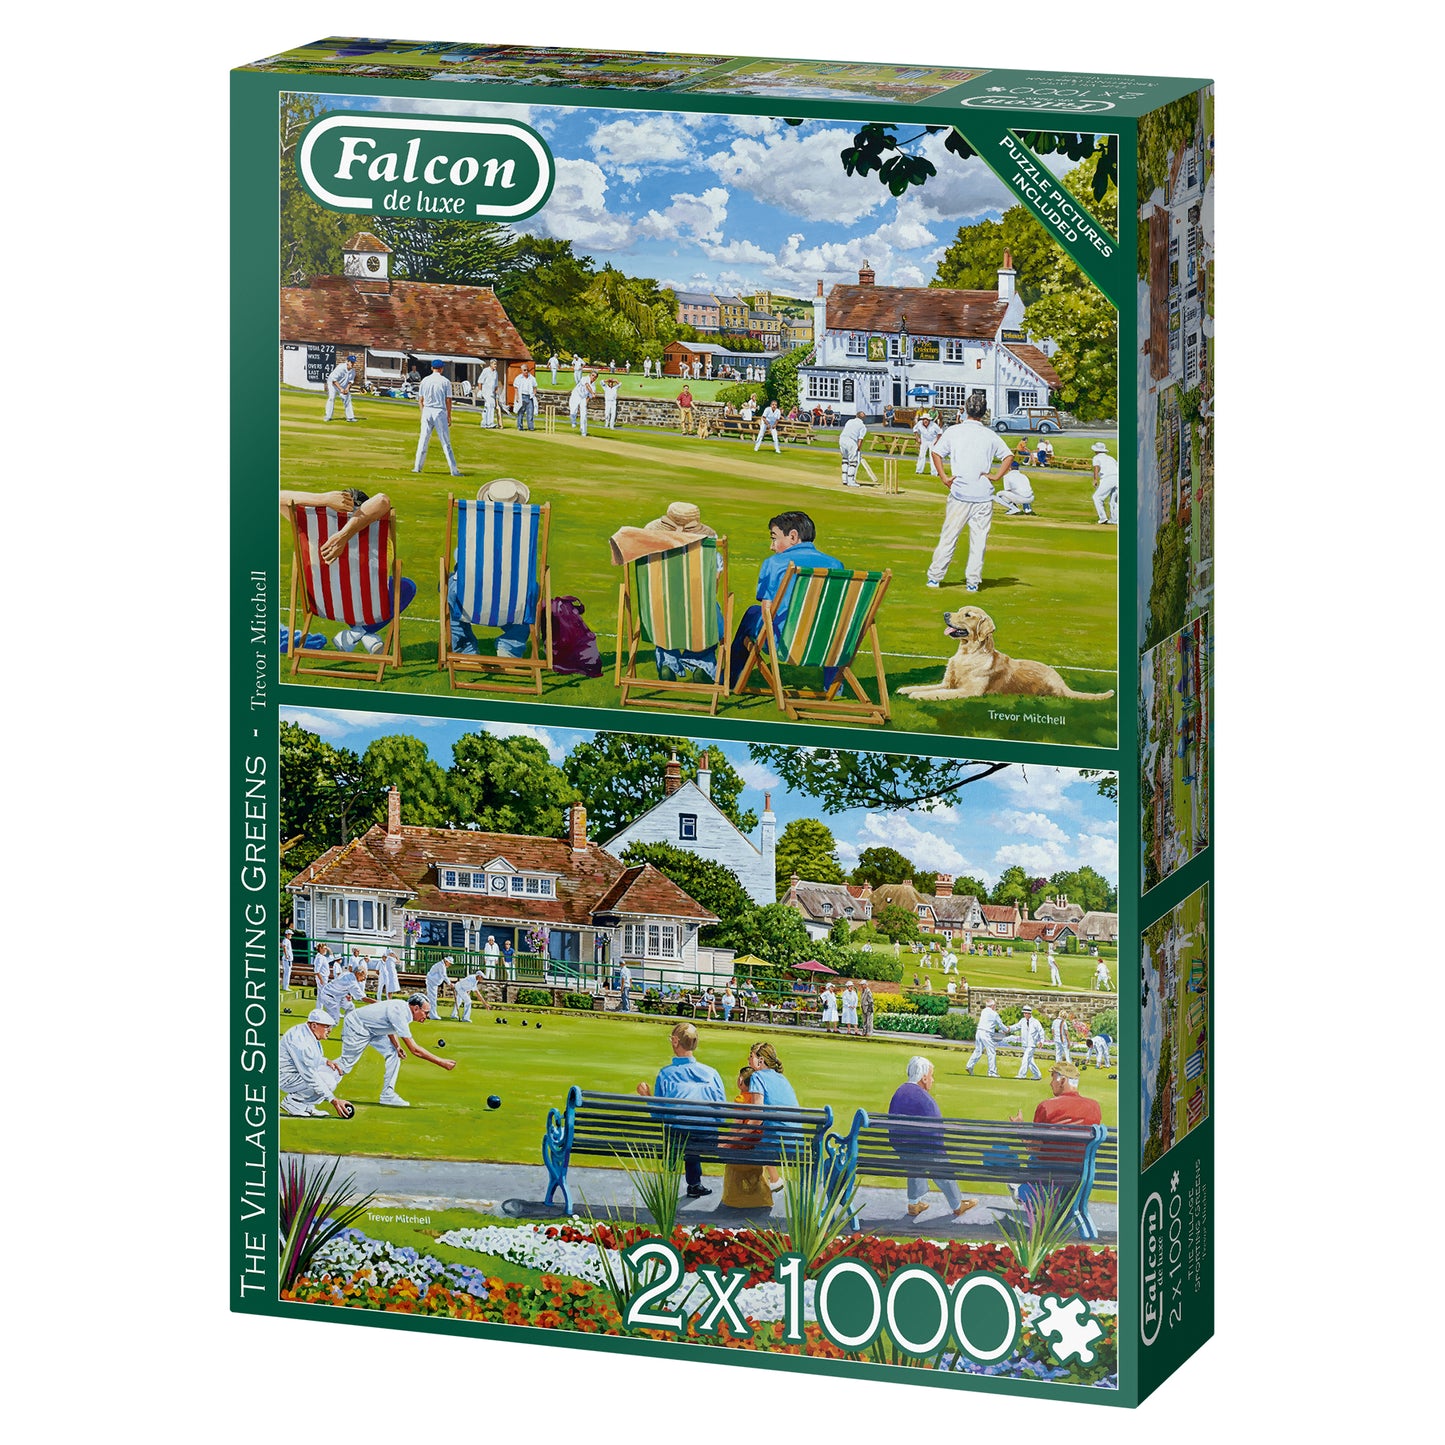 Falcon - The Village Sporting Greens (2x1000 pieces) - product image - Jumboplay.com